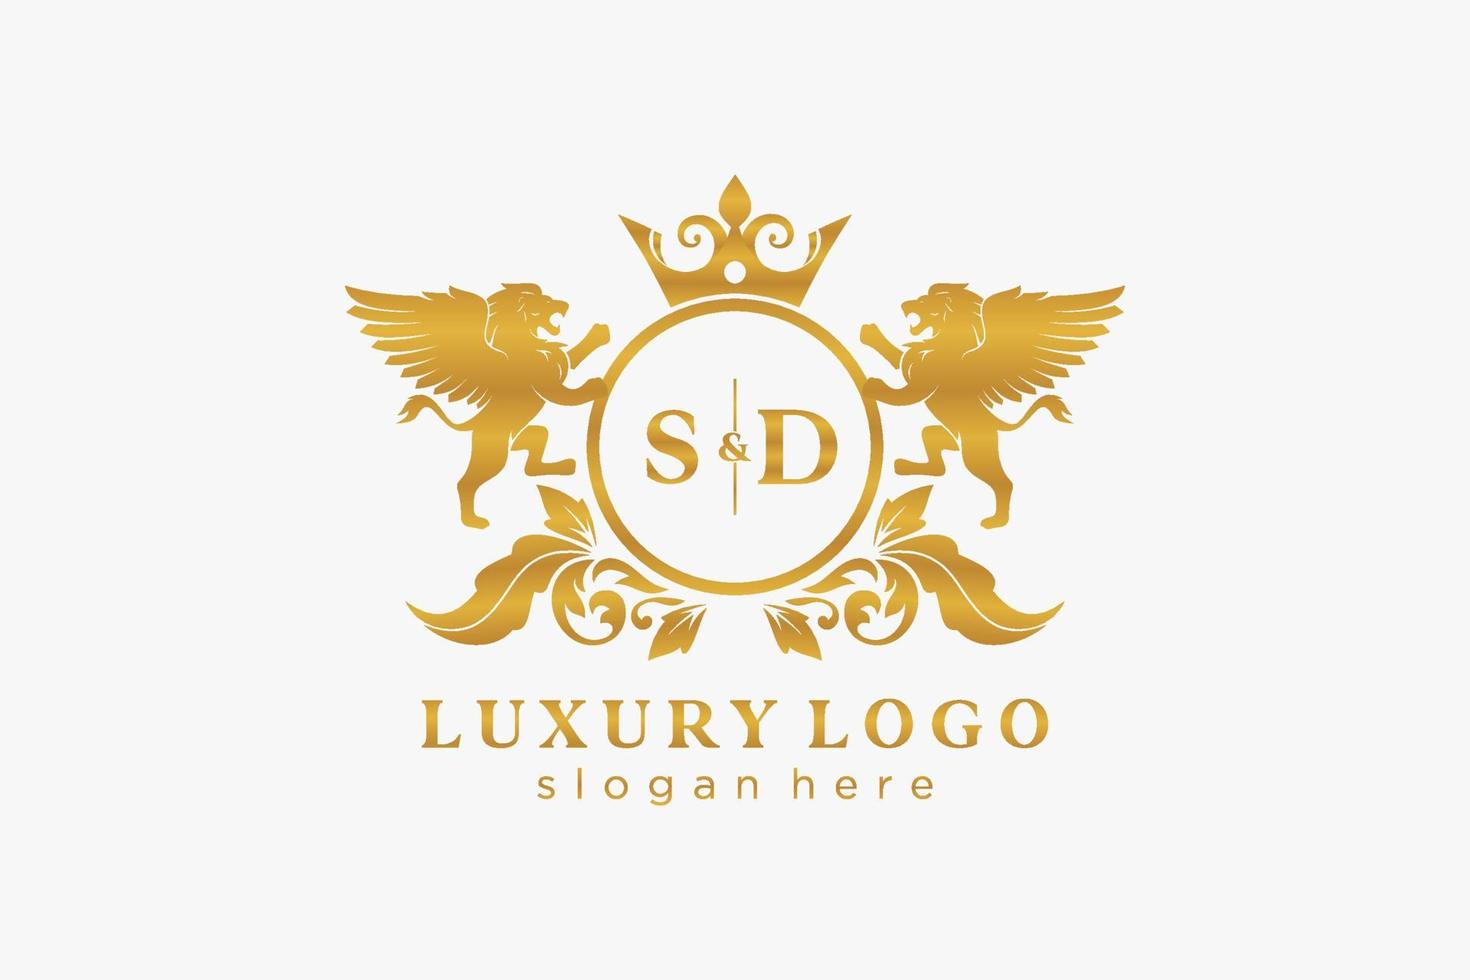 Initial SD Letter Lion Royal Luxury Logo template in vector art for Restaurant, Royalty, Boutique, Cafe, Hotel, Heraldic, Jewelry, Fashion and other vector illustration.